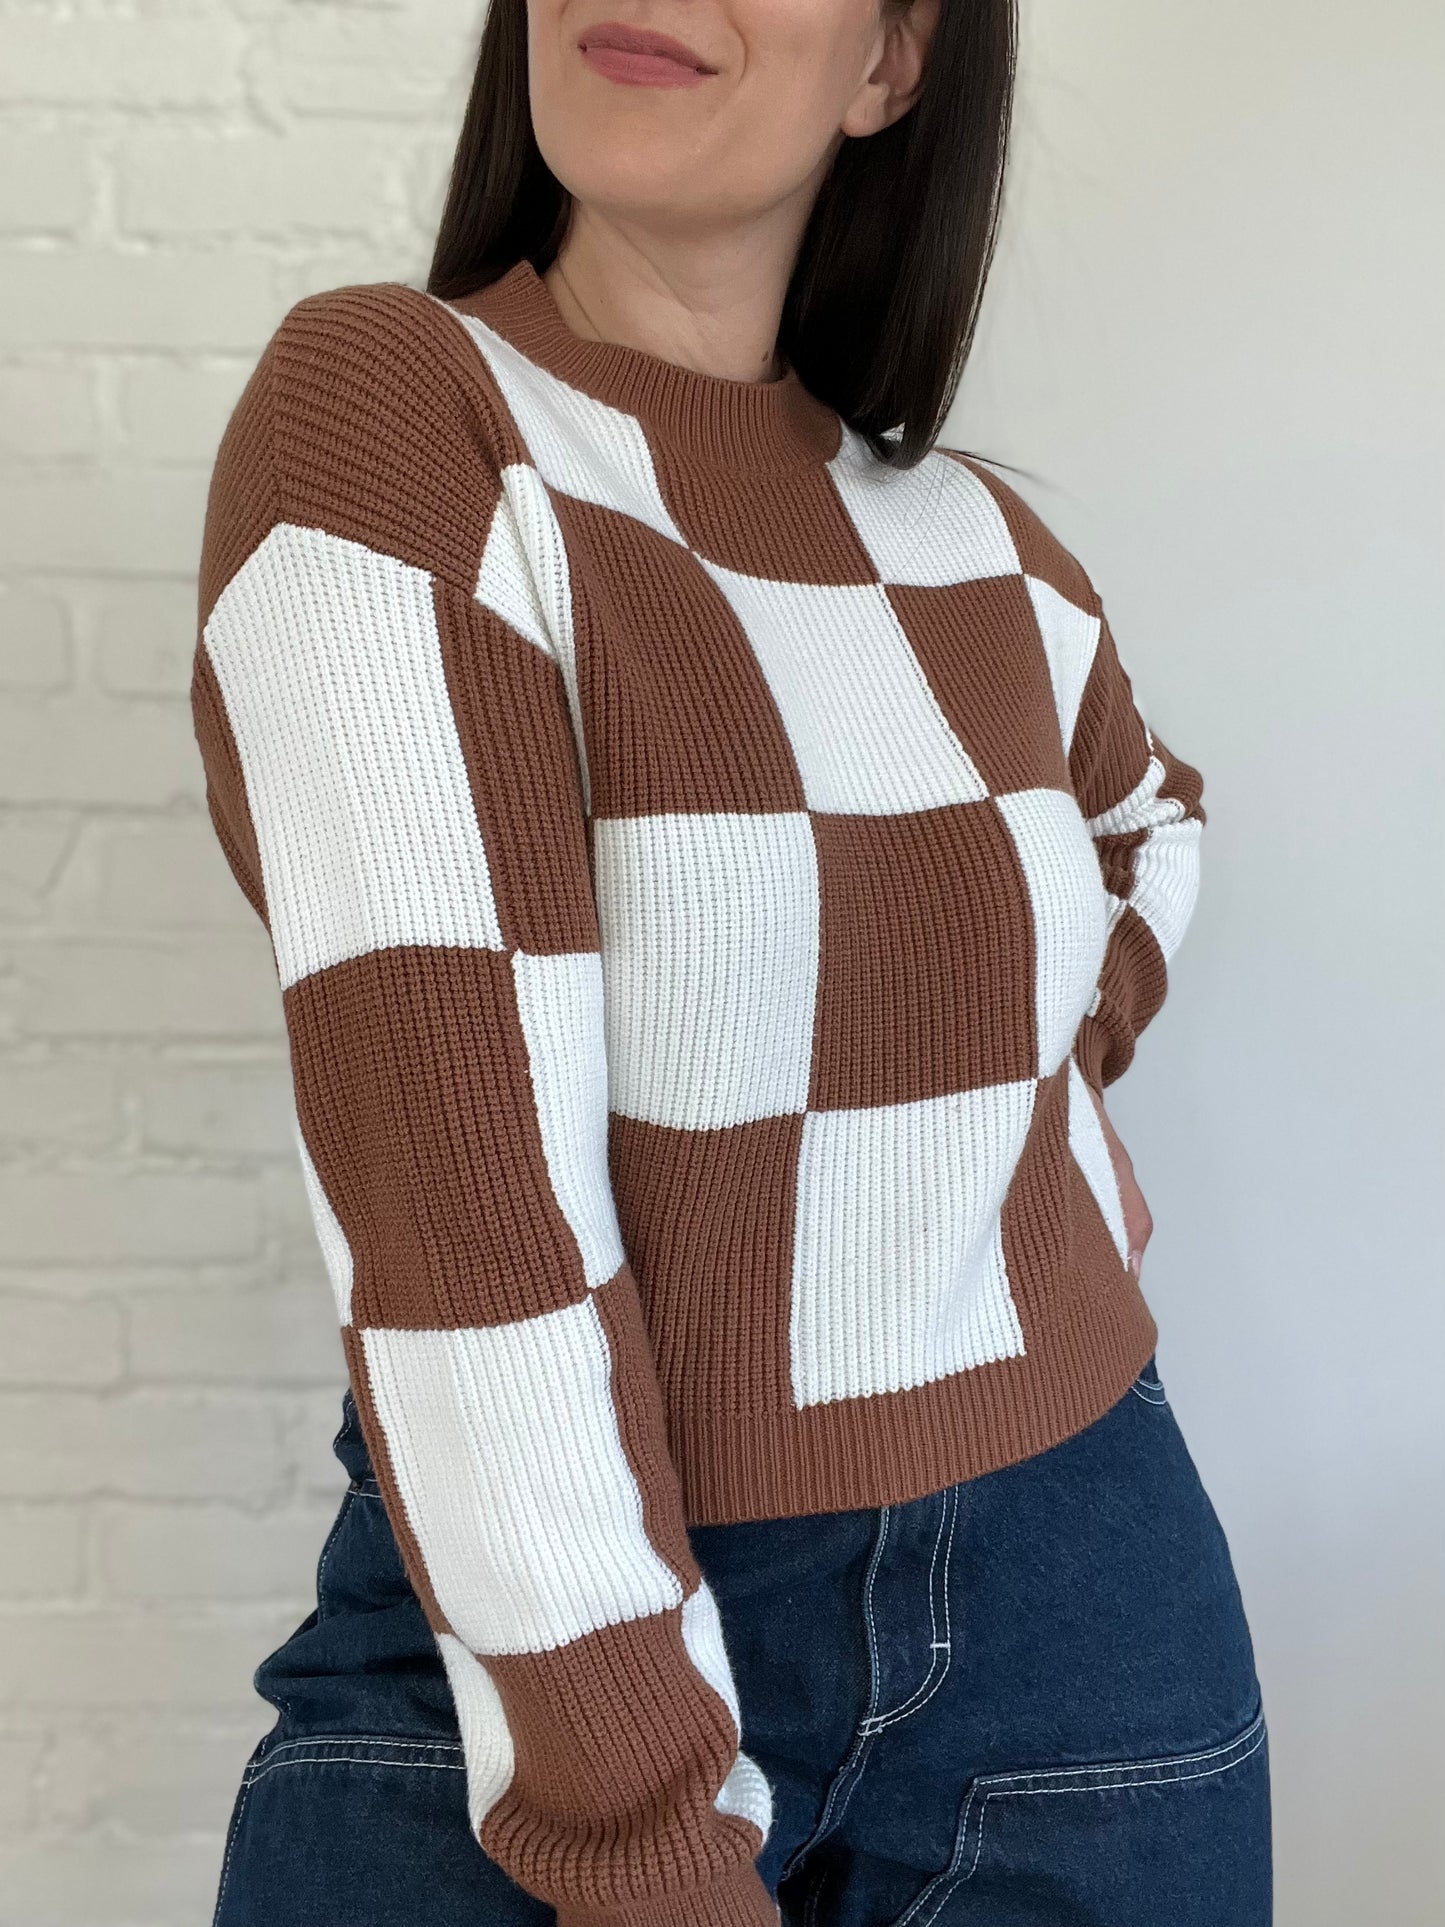 Camel & White Checkered Sweater - Size S